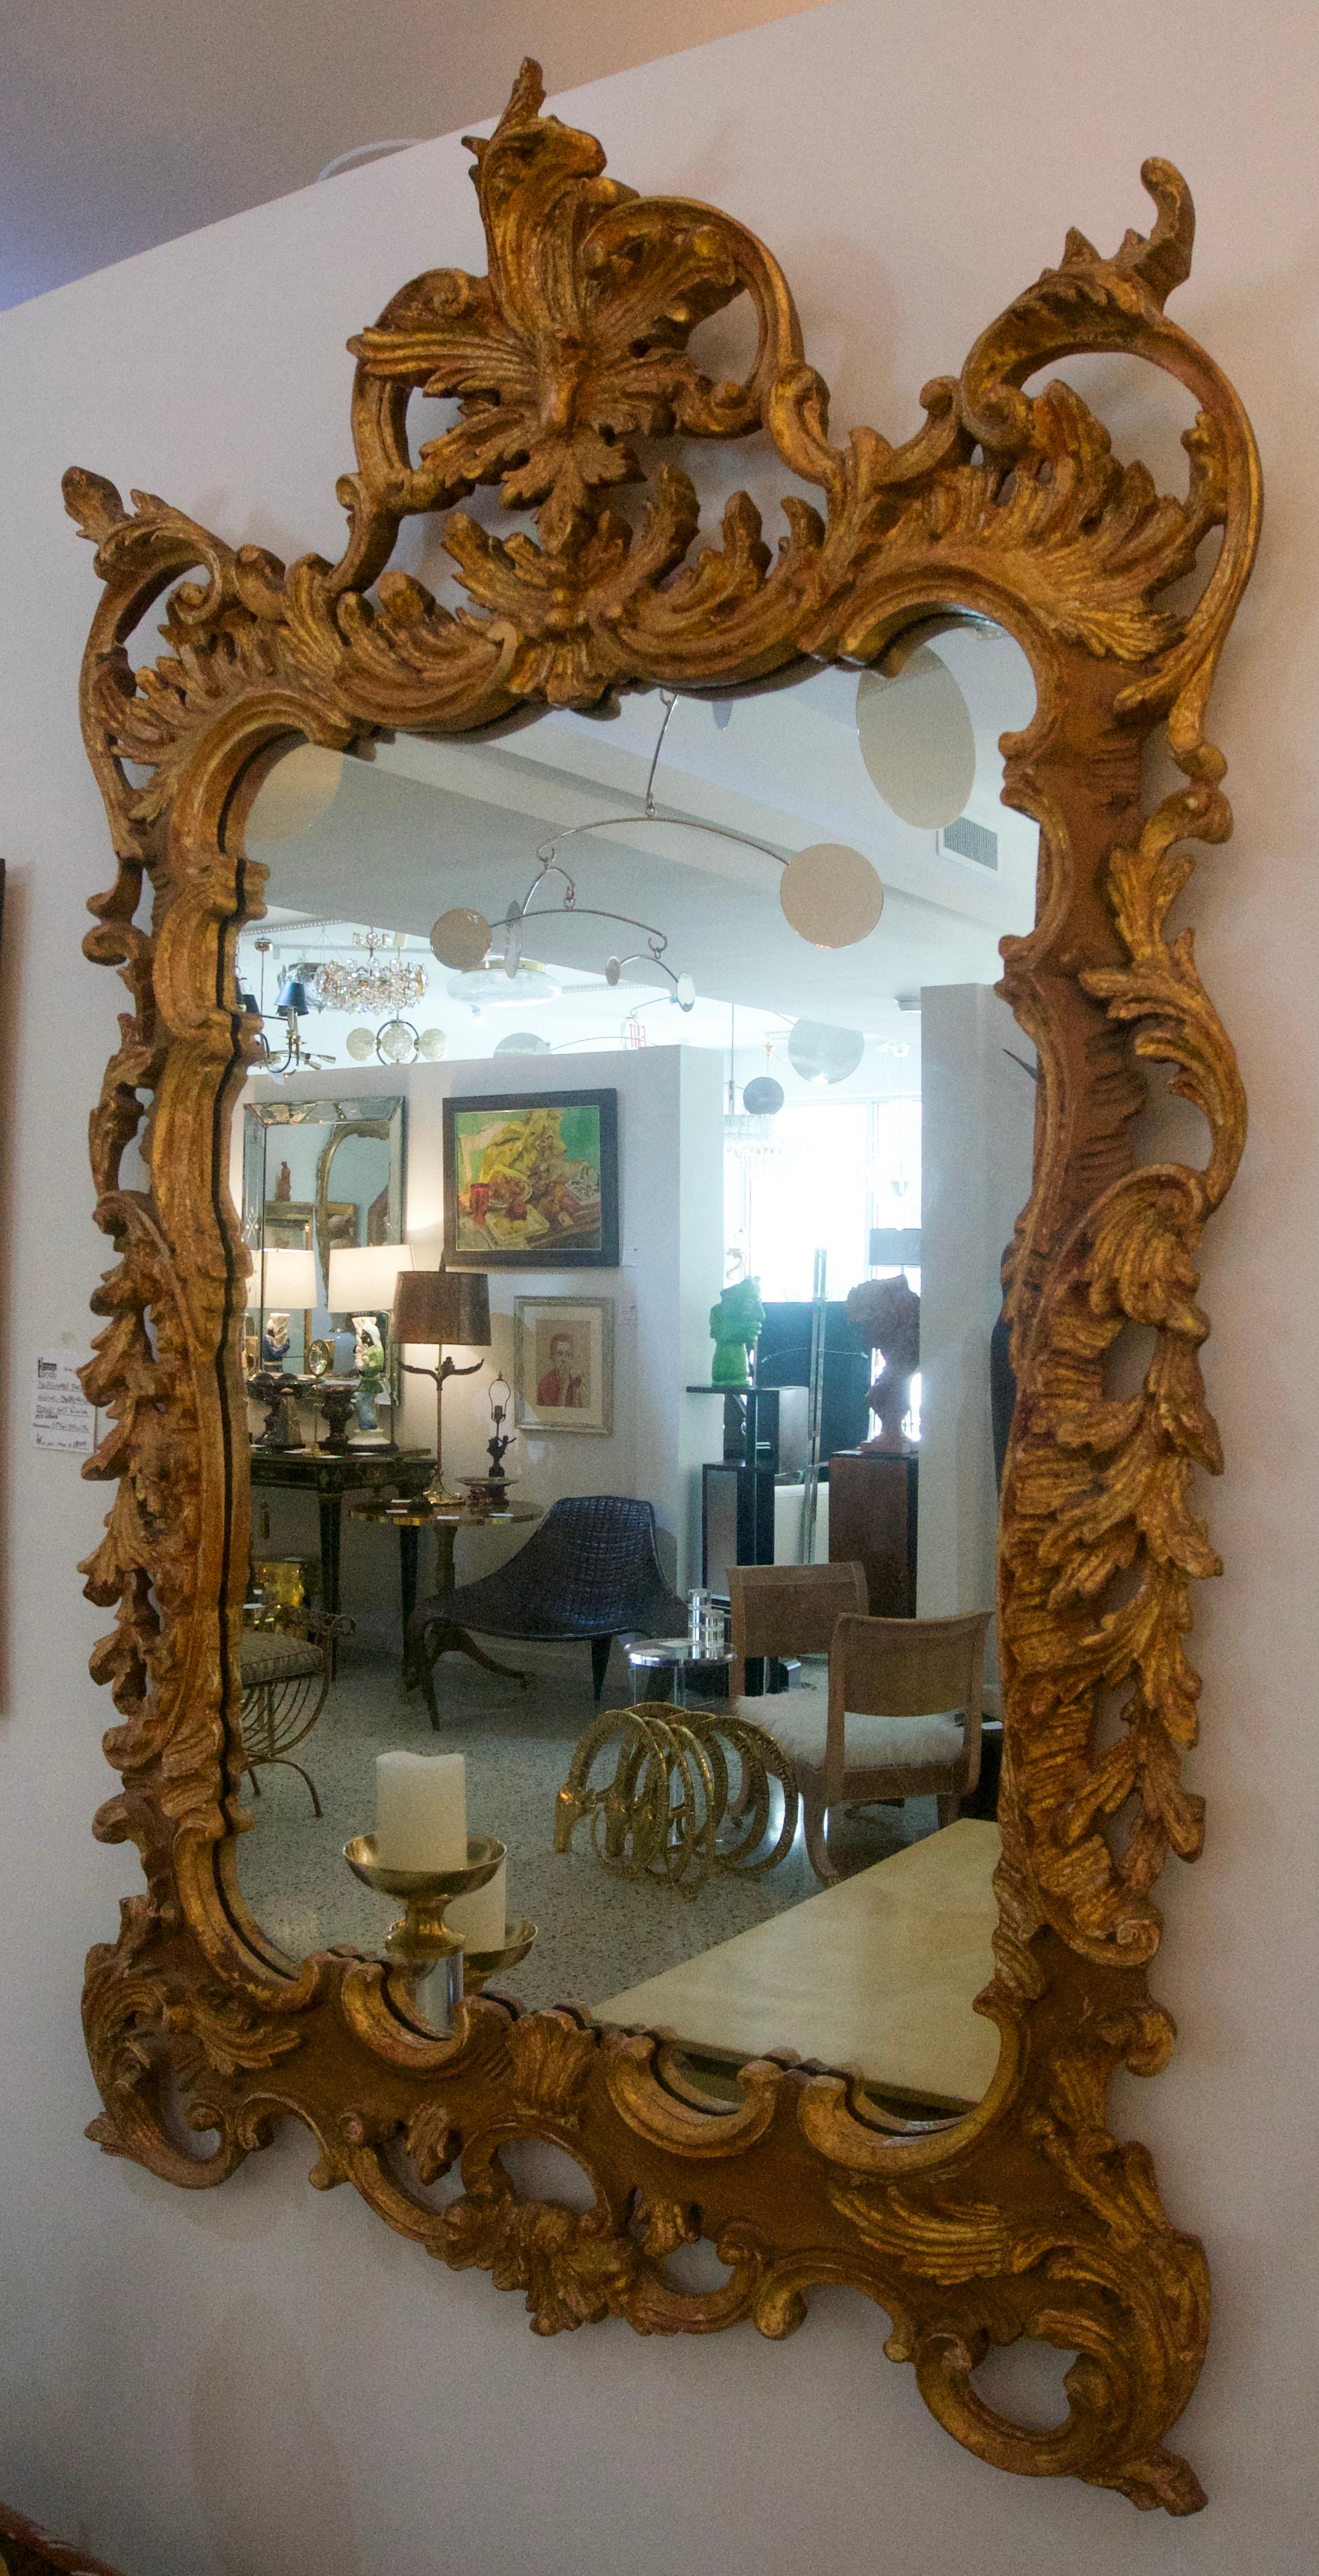 This beautiful hand carved wooden Chippendale Rococo style wall mirror is by the American firm of La Barge and was imported from Italy in the 1970s. The piece has a very warm and subtle antiqued finish.